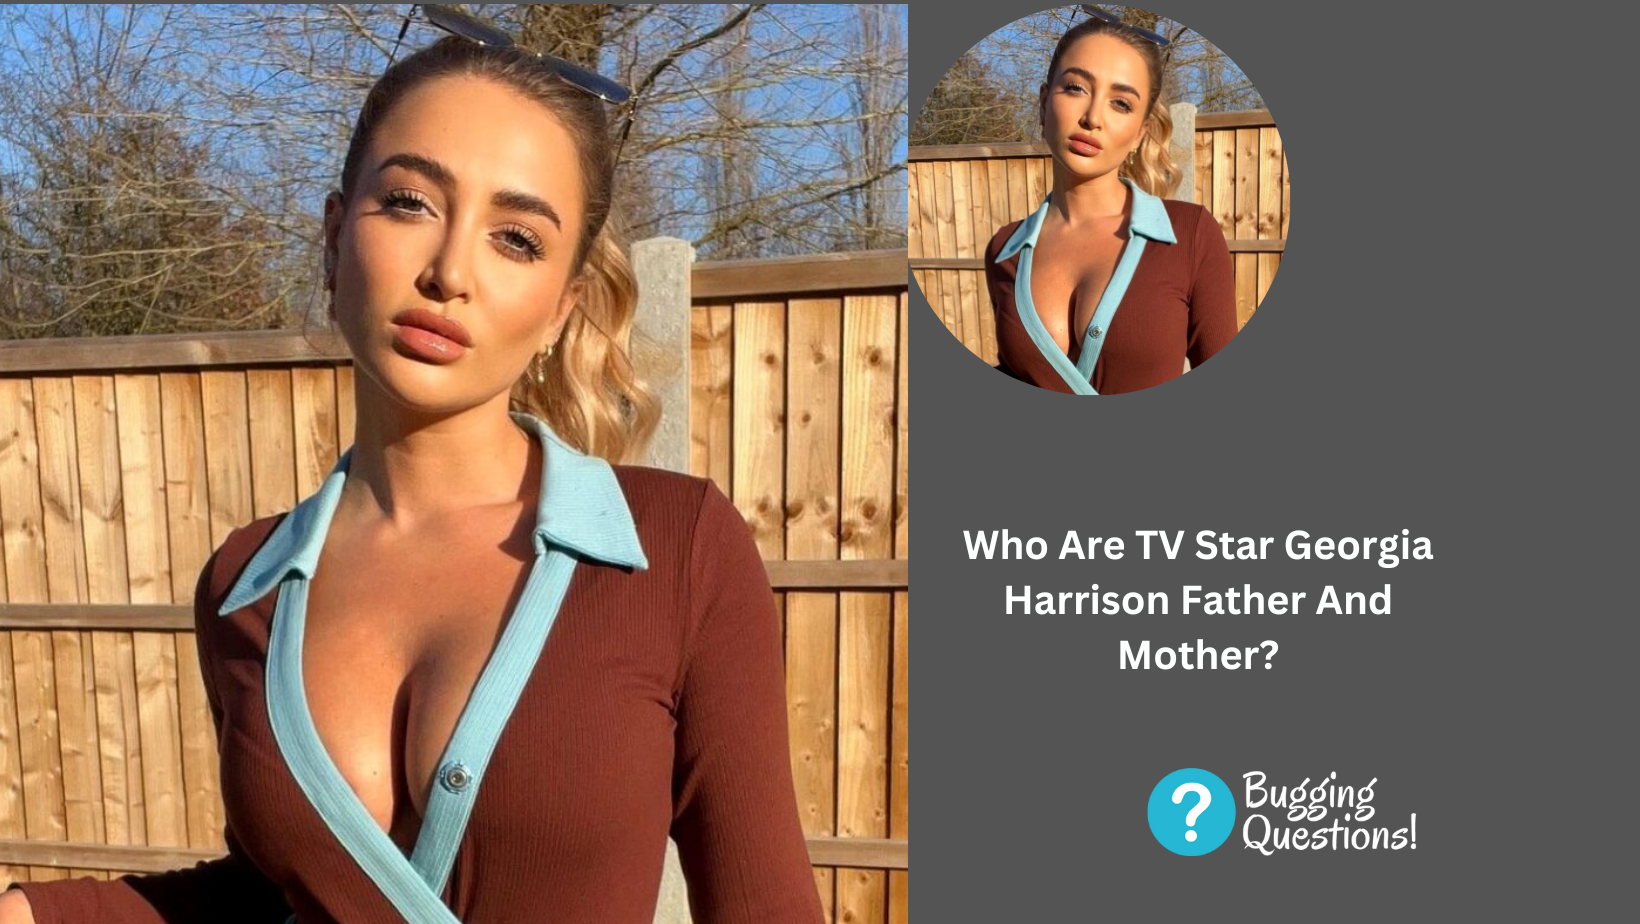 Who Are TV Star Georgia Harrison Father And Mother?